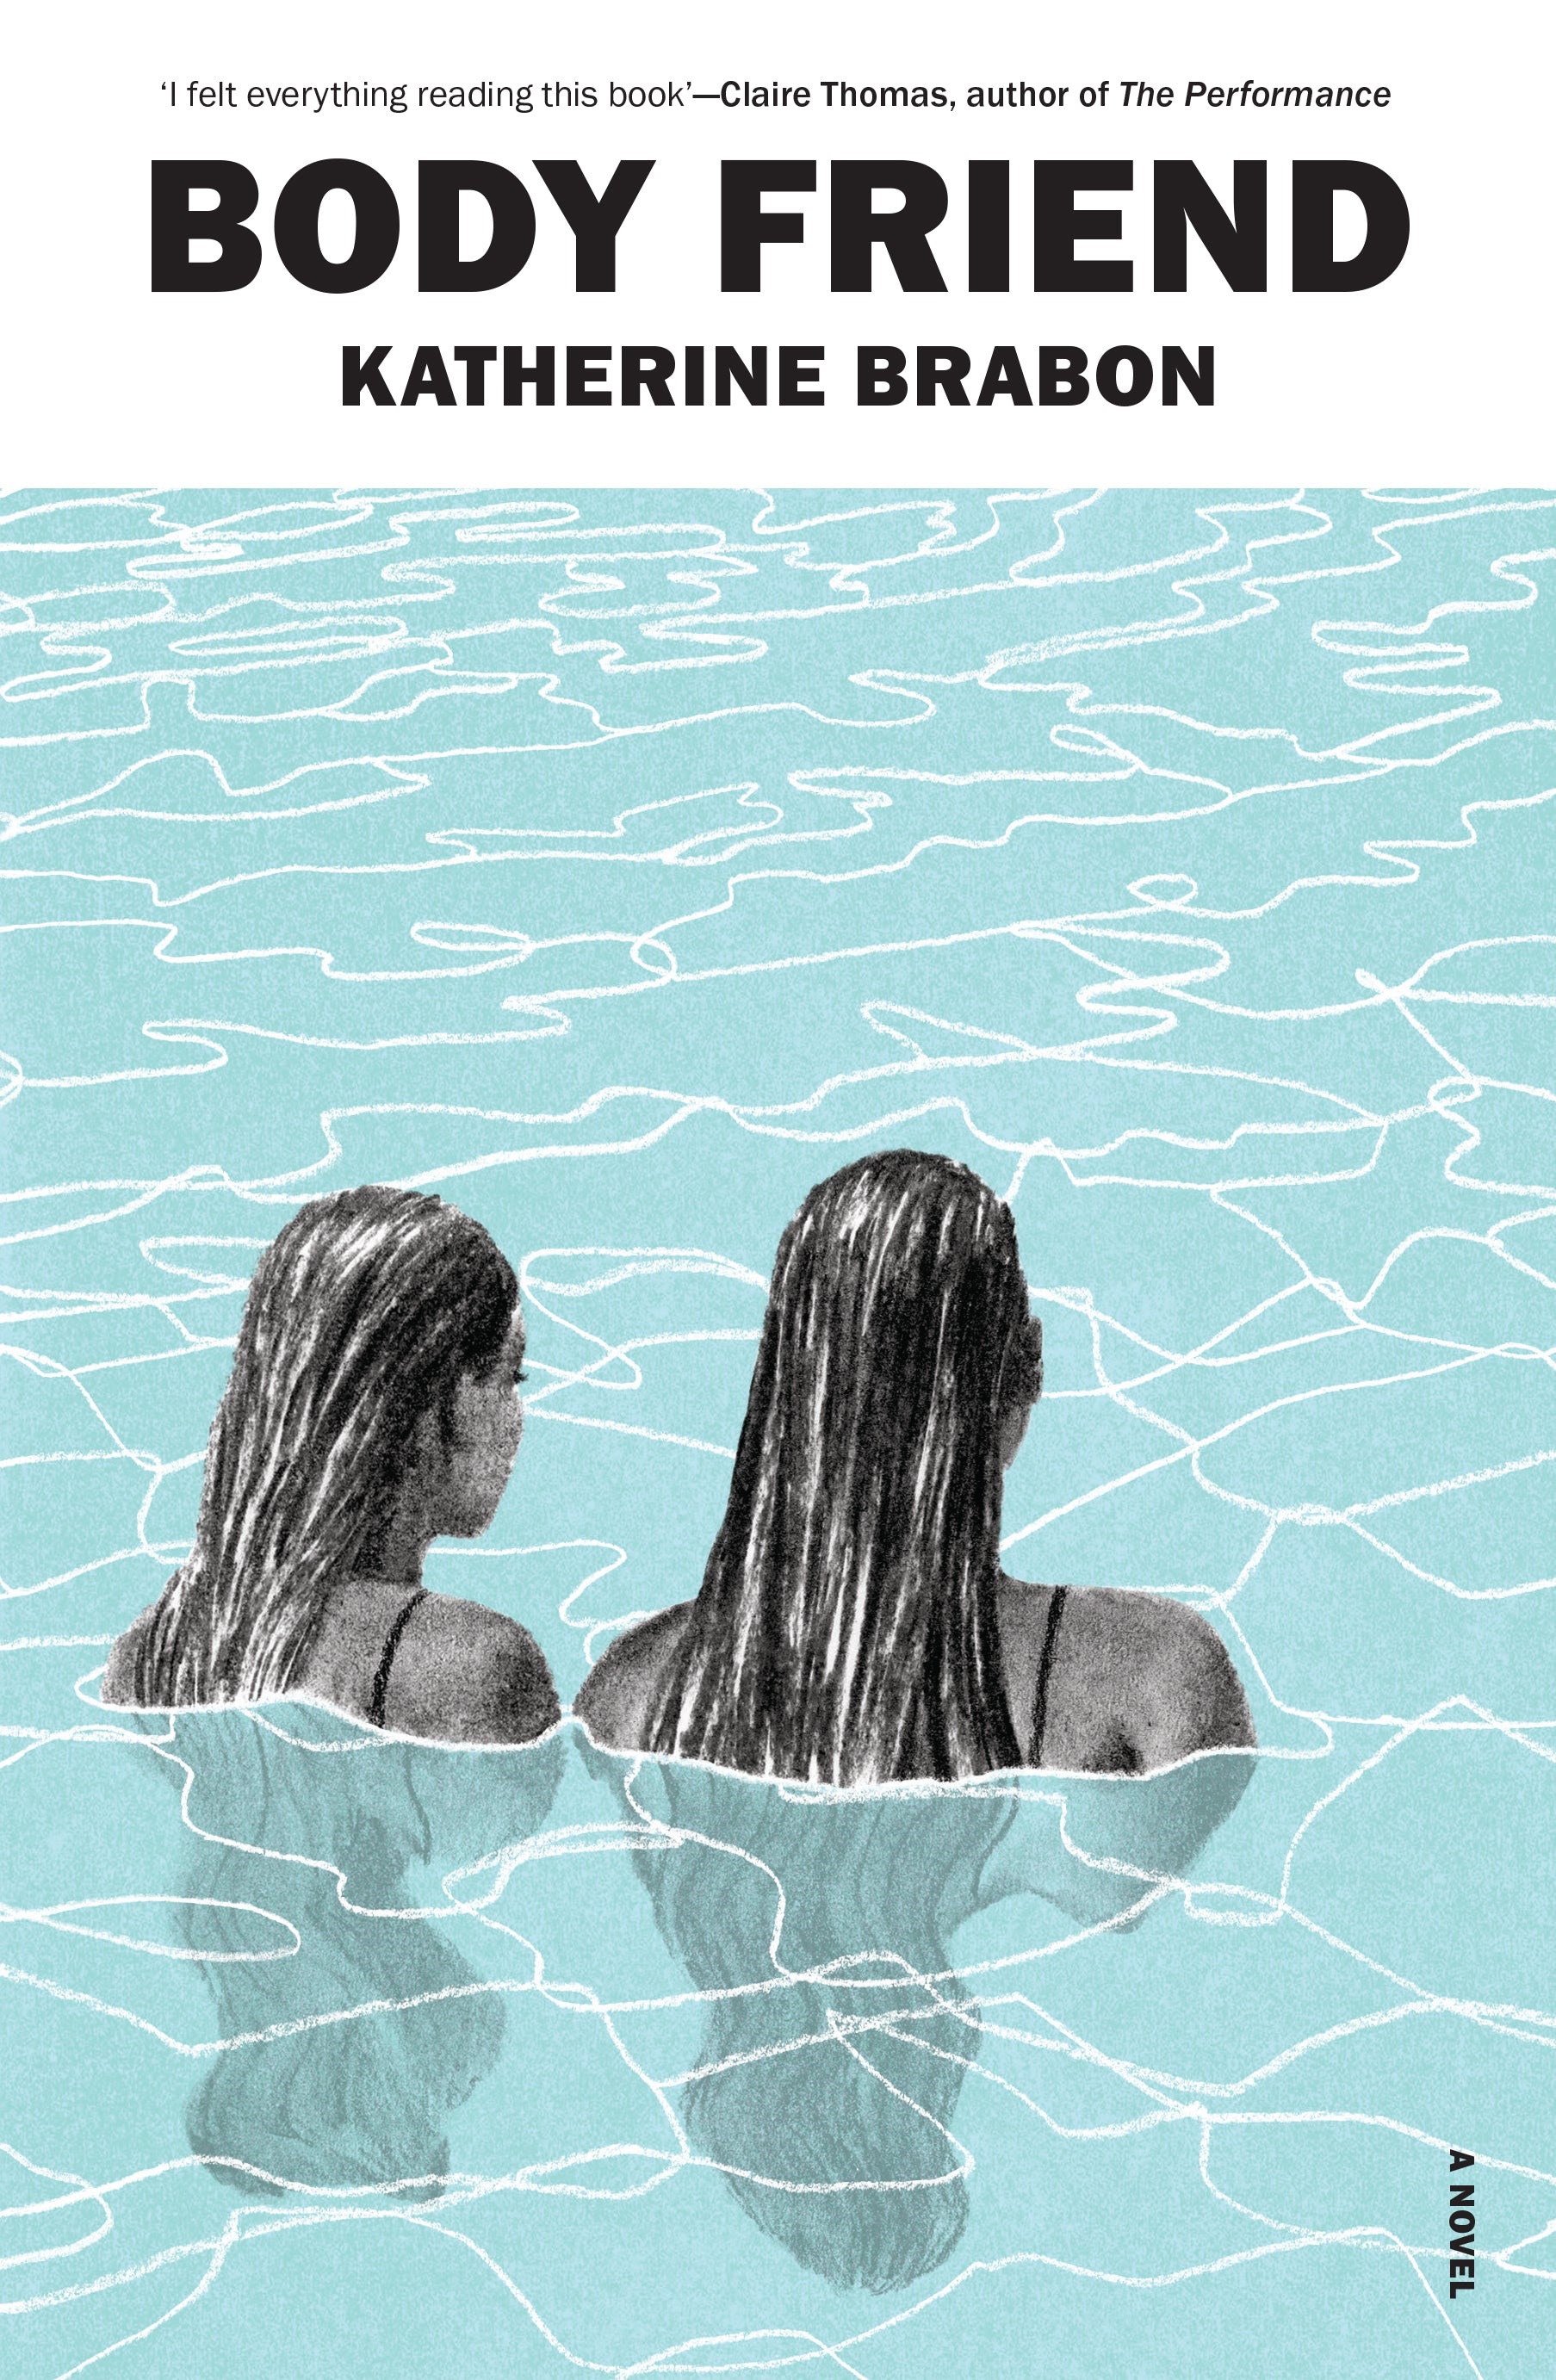 A book cover showing an illustration of two young, long-haired female swimmers standing in water, facing away from the camera